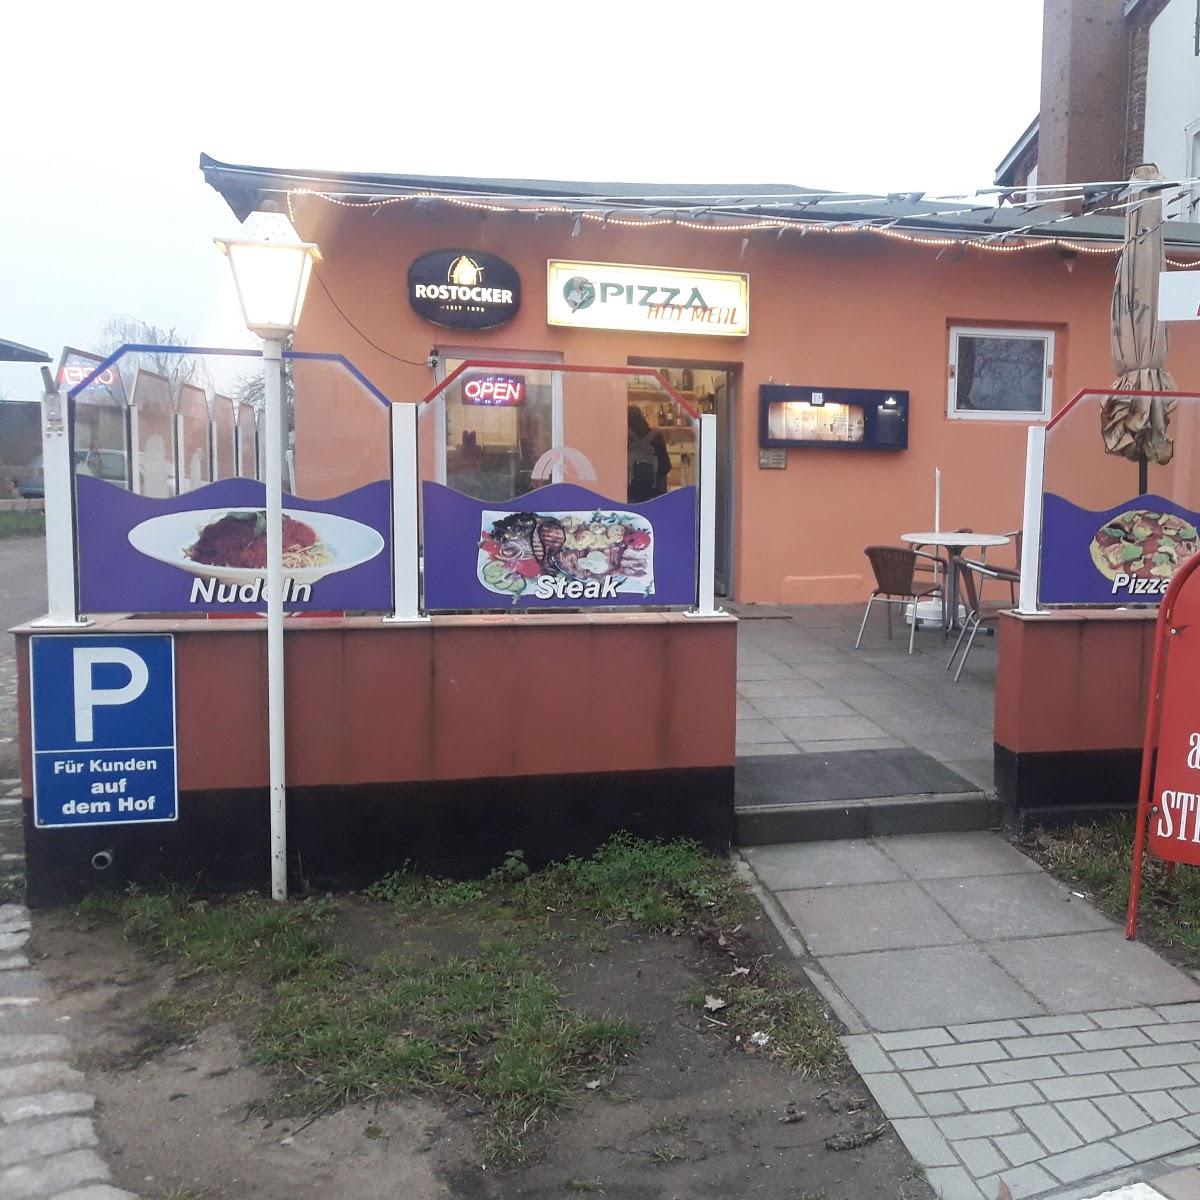 Restaurant "Pizza Hot Meal" in Kavelstorf